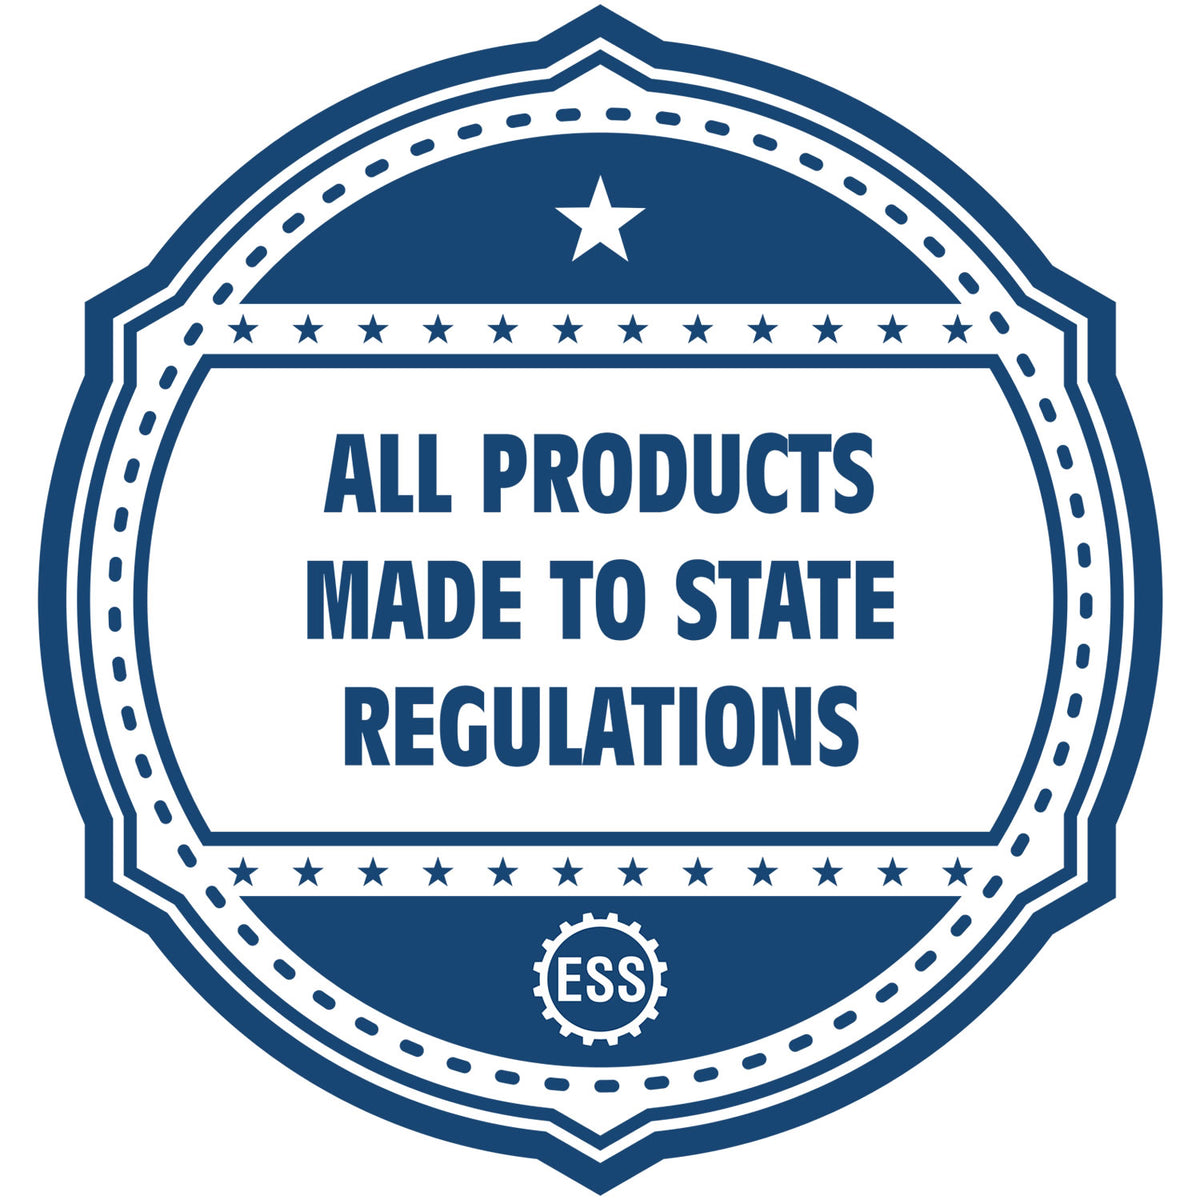 An icon or badge element for the Self-Inking Louisiana Landscape Architect Stamp showing that this product is made in compliance with state regulations.